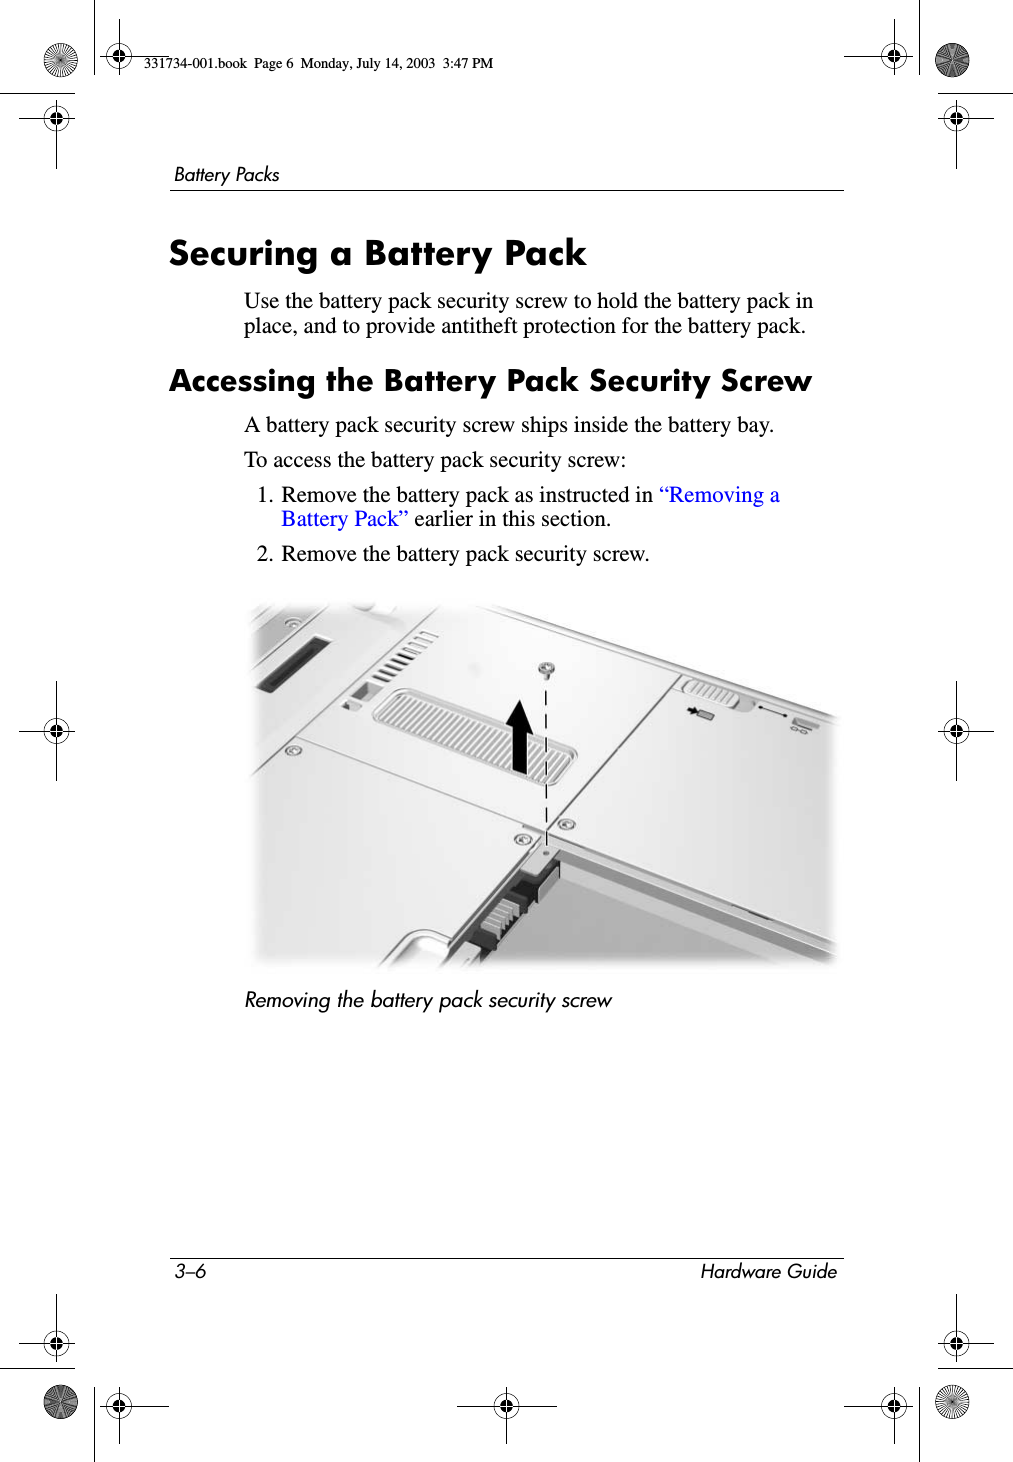 3–6 Hardware GuideBattery PacksSecuring a Battery PackUse the battery pack security screw to hold the battery pack in place, and to provide antitheft protection for the battery pack. Accessing the Battery Pack Security ScrewA battery pack security screw ships inside the battery bay. To access the battery pack security screw:1. Remove the battery pack as instructed in “Removing a Battery Pack” earlier in this section.2. Remove the battery pack security screw.Removing the battery pack security screw331734-001.book  Page 6  Monday, July 14, 2003  3:47 PM